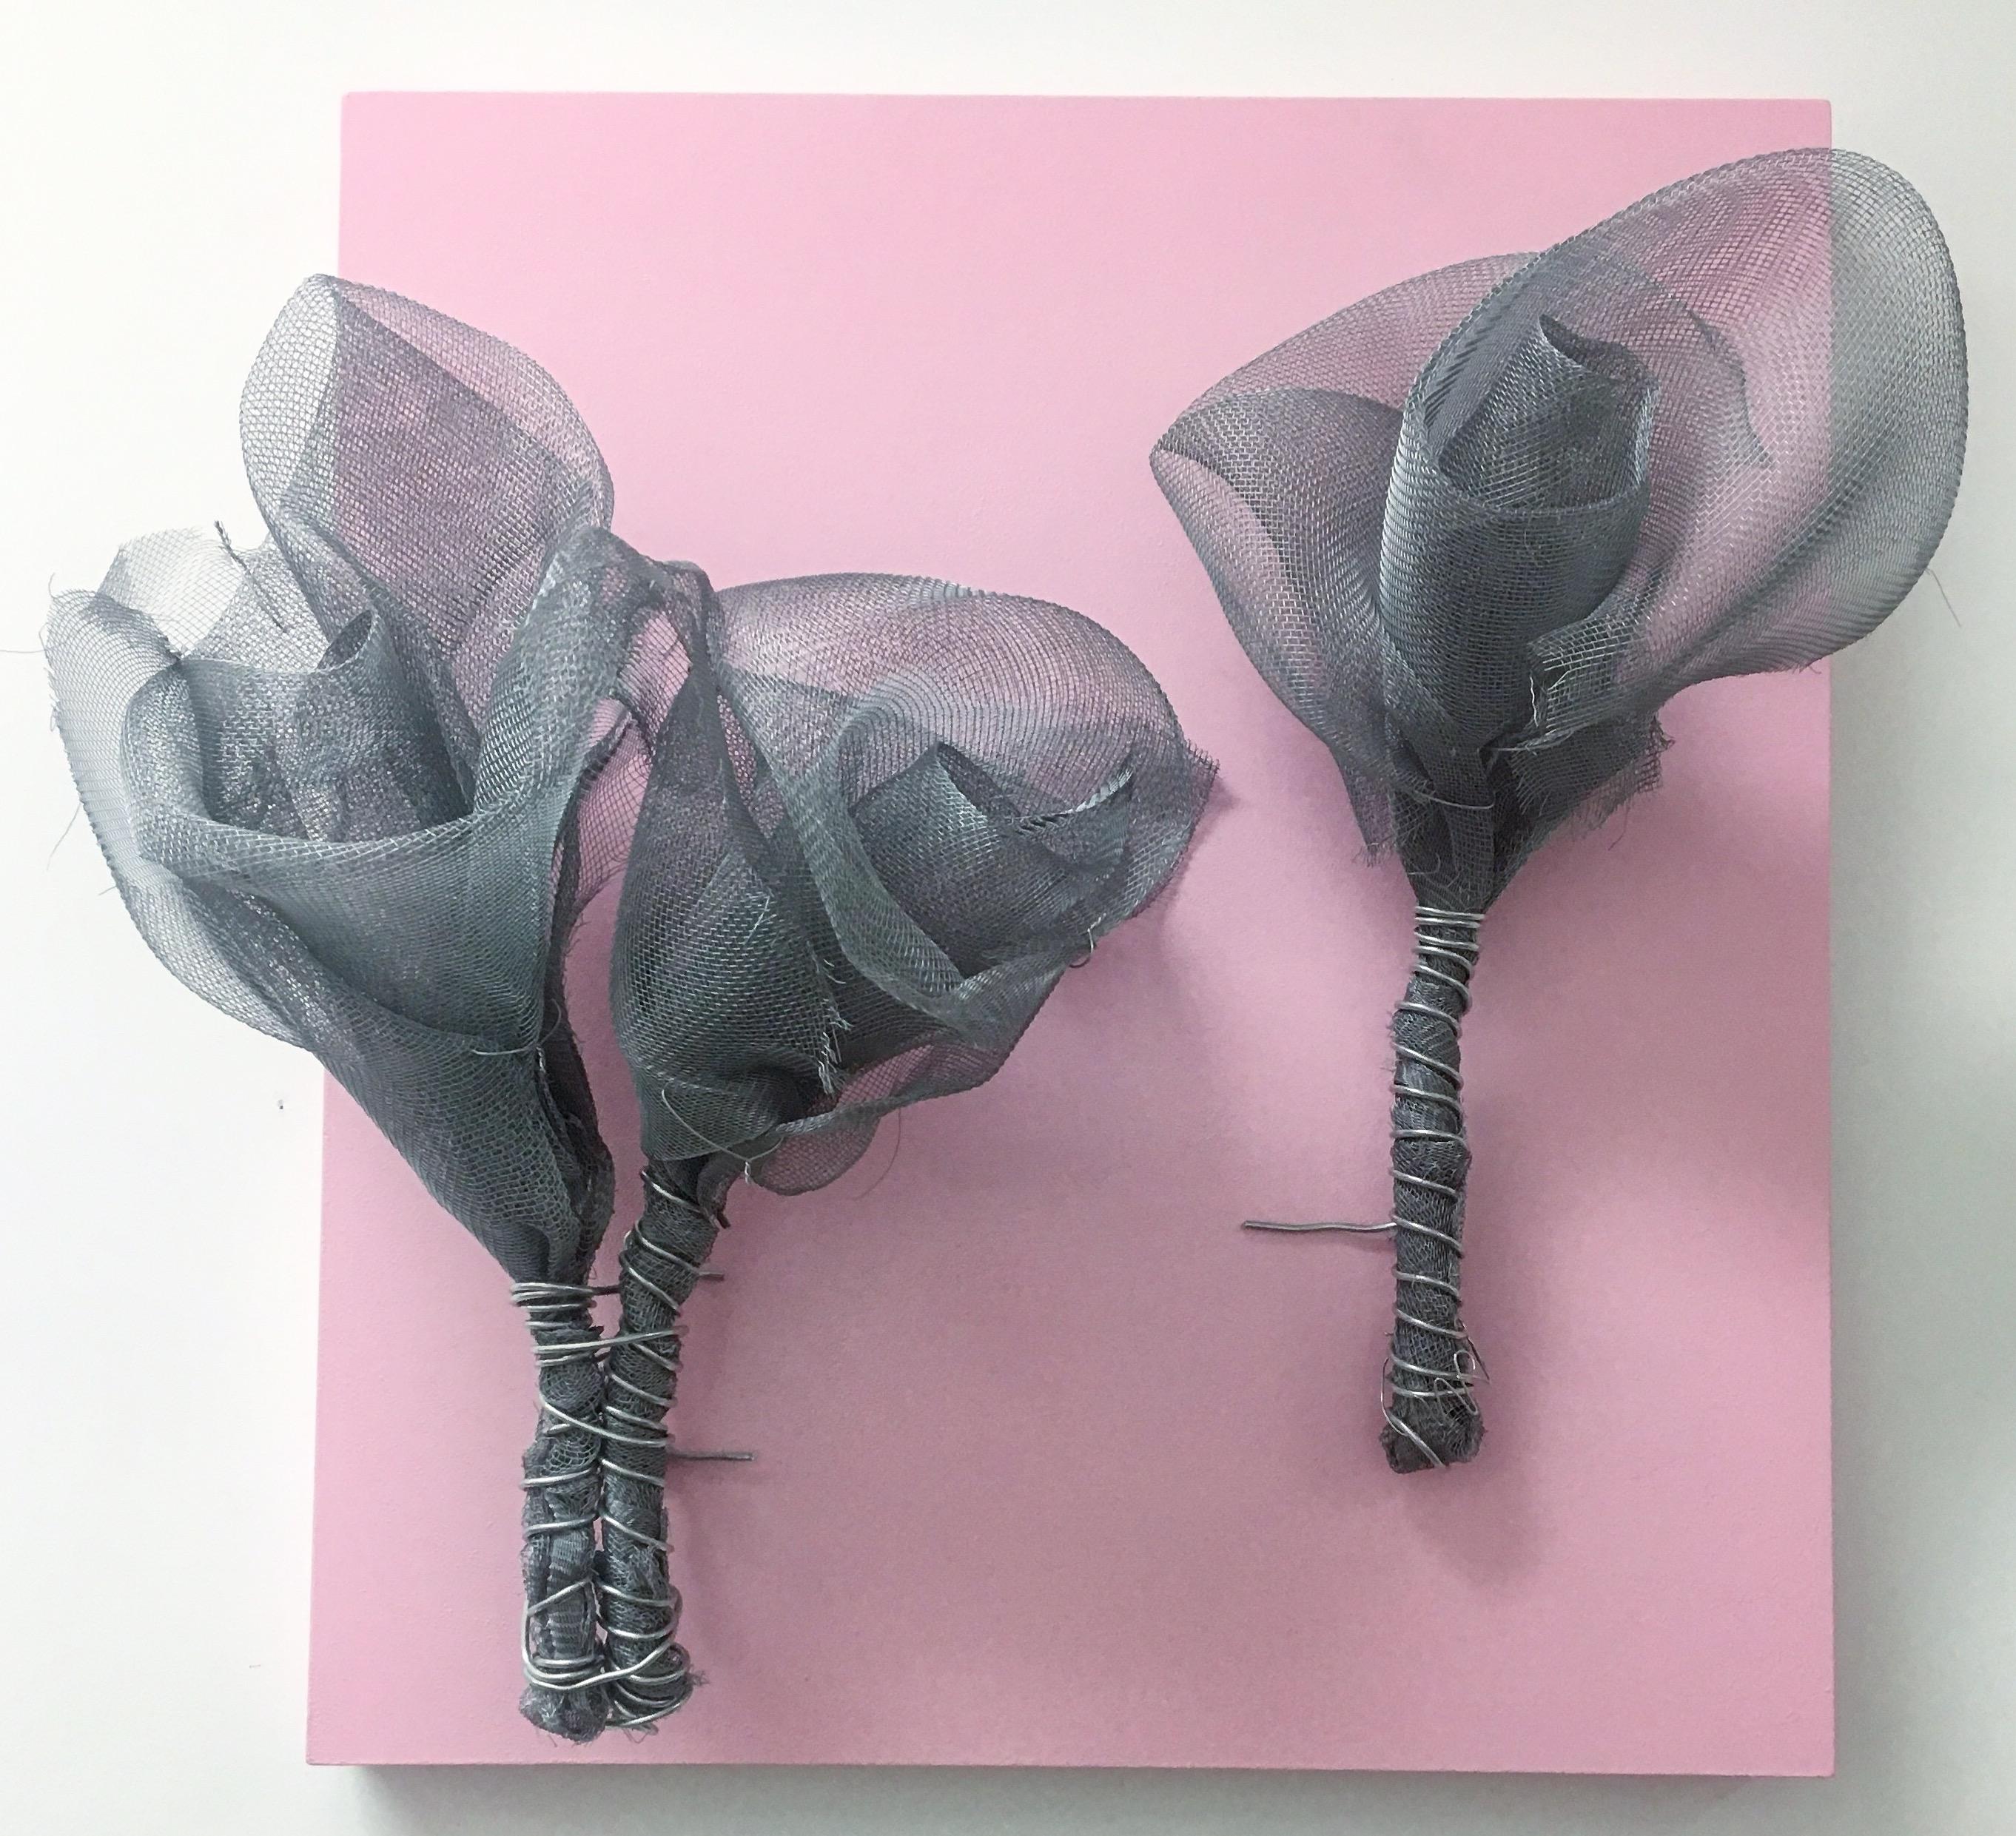 ROSES (pink) PASSION sculpture 19" x 17" x 7" inch by Melanie Newcombe

Aluminum window screen, aluminum wire, wood, paint 
2018

* * * Melanie Newcombe * * *
* * Artist Statement * *
I am perpetually pushing materials toward innovative structures,